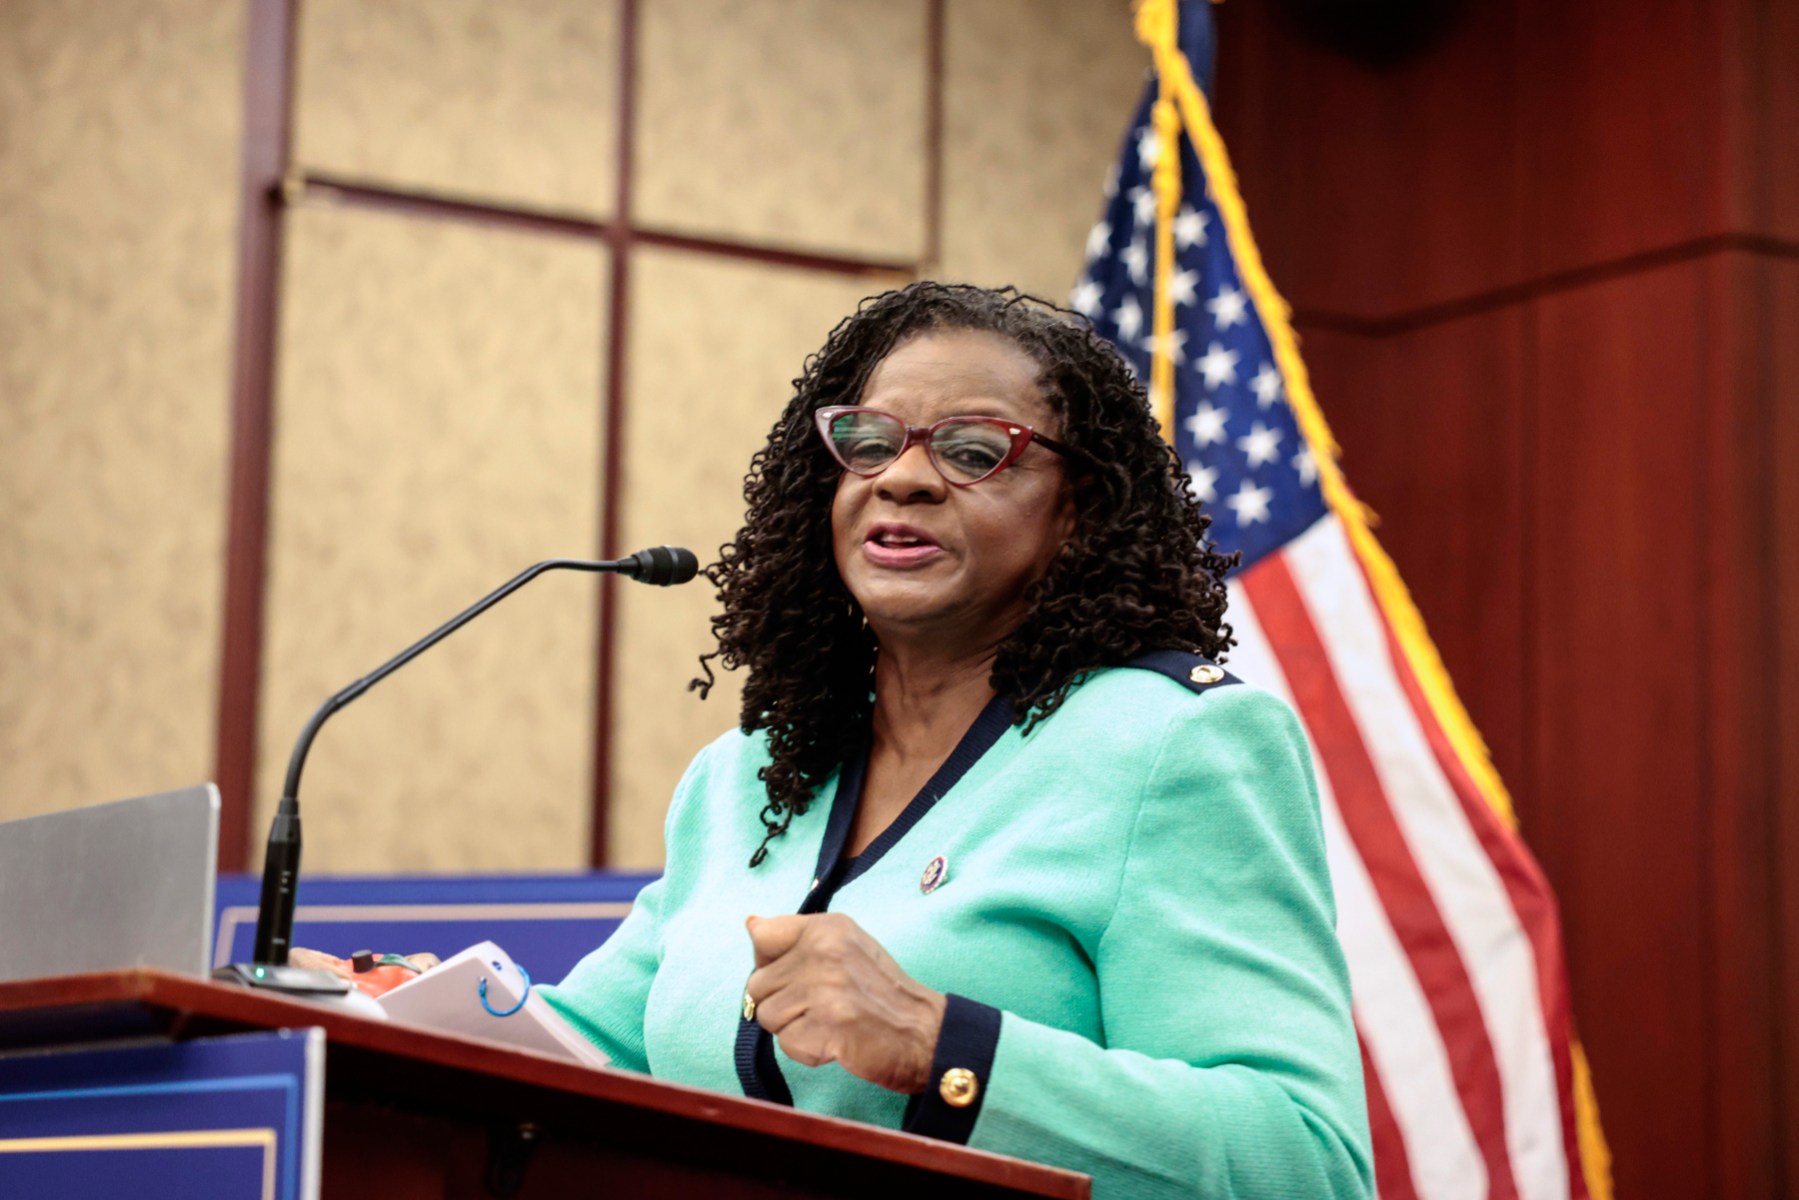 Rep. Gwen Moore, Democrat of Wisconsin, wearing a green suit and red glasses